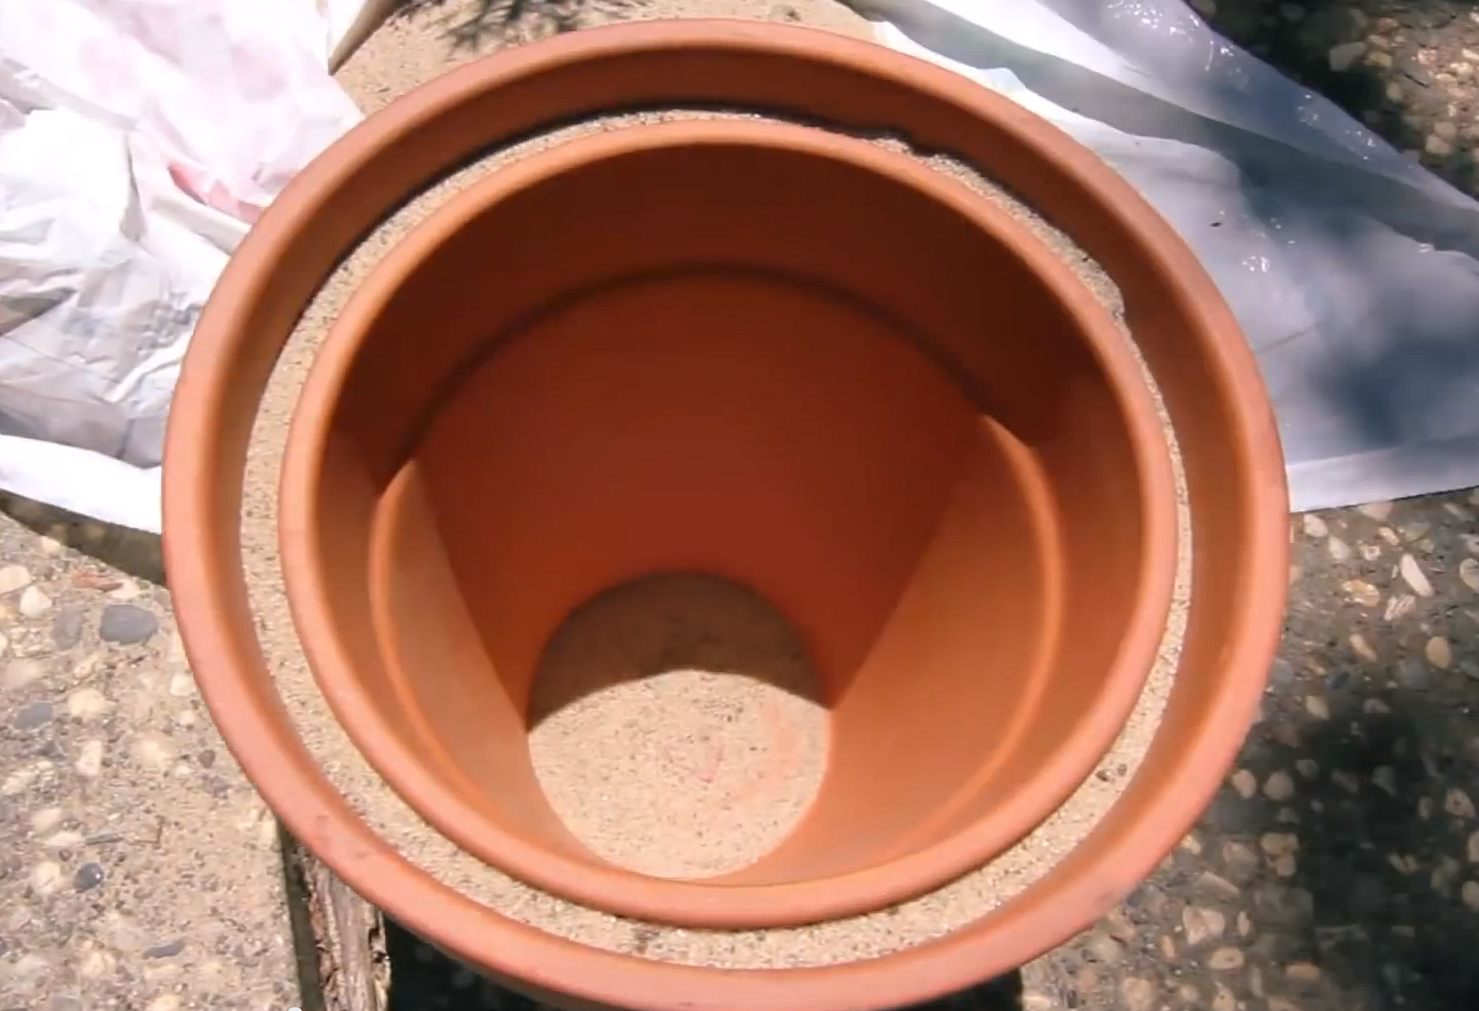 Make a Pot-in-Pot Refrigerator That Cools with No Electricity